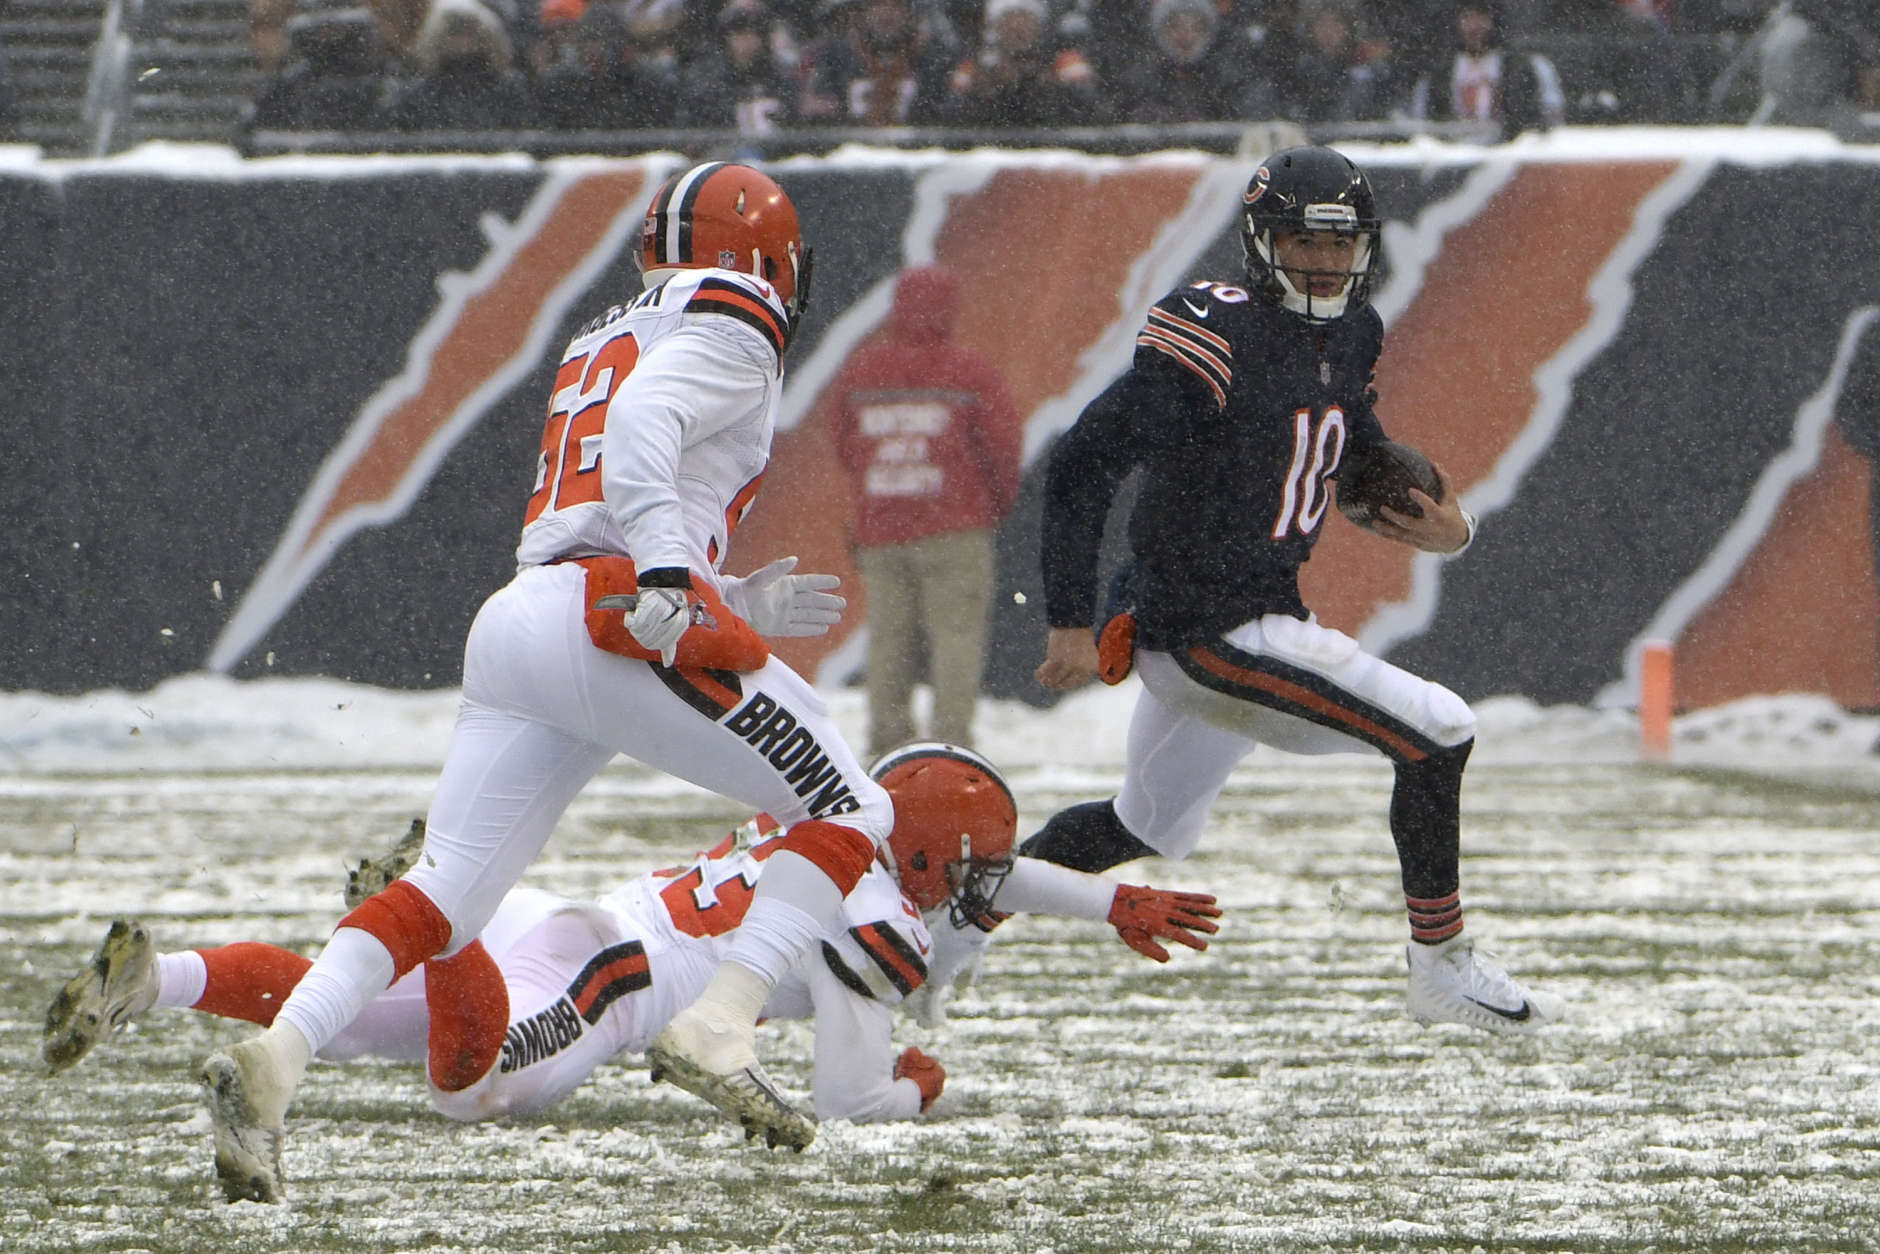 CHICAGO, IL - DECEMBER 24:  Quarterback  Mitchell Trubisky #10 of the Chicago Bears runs with the football in the second quarter against the Cleveland Browns at Soldier Field on December 24, 2017 in Chicago, Illinois.  (Photo by David Banks/Getty Images)